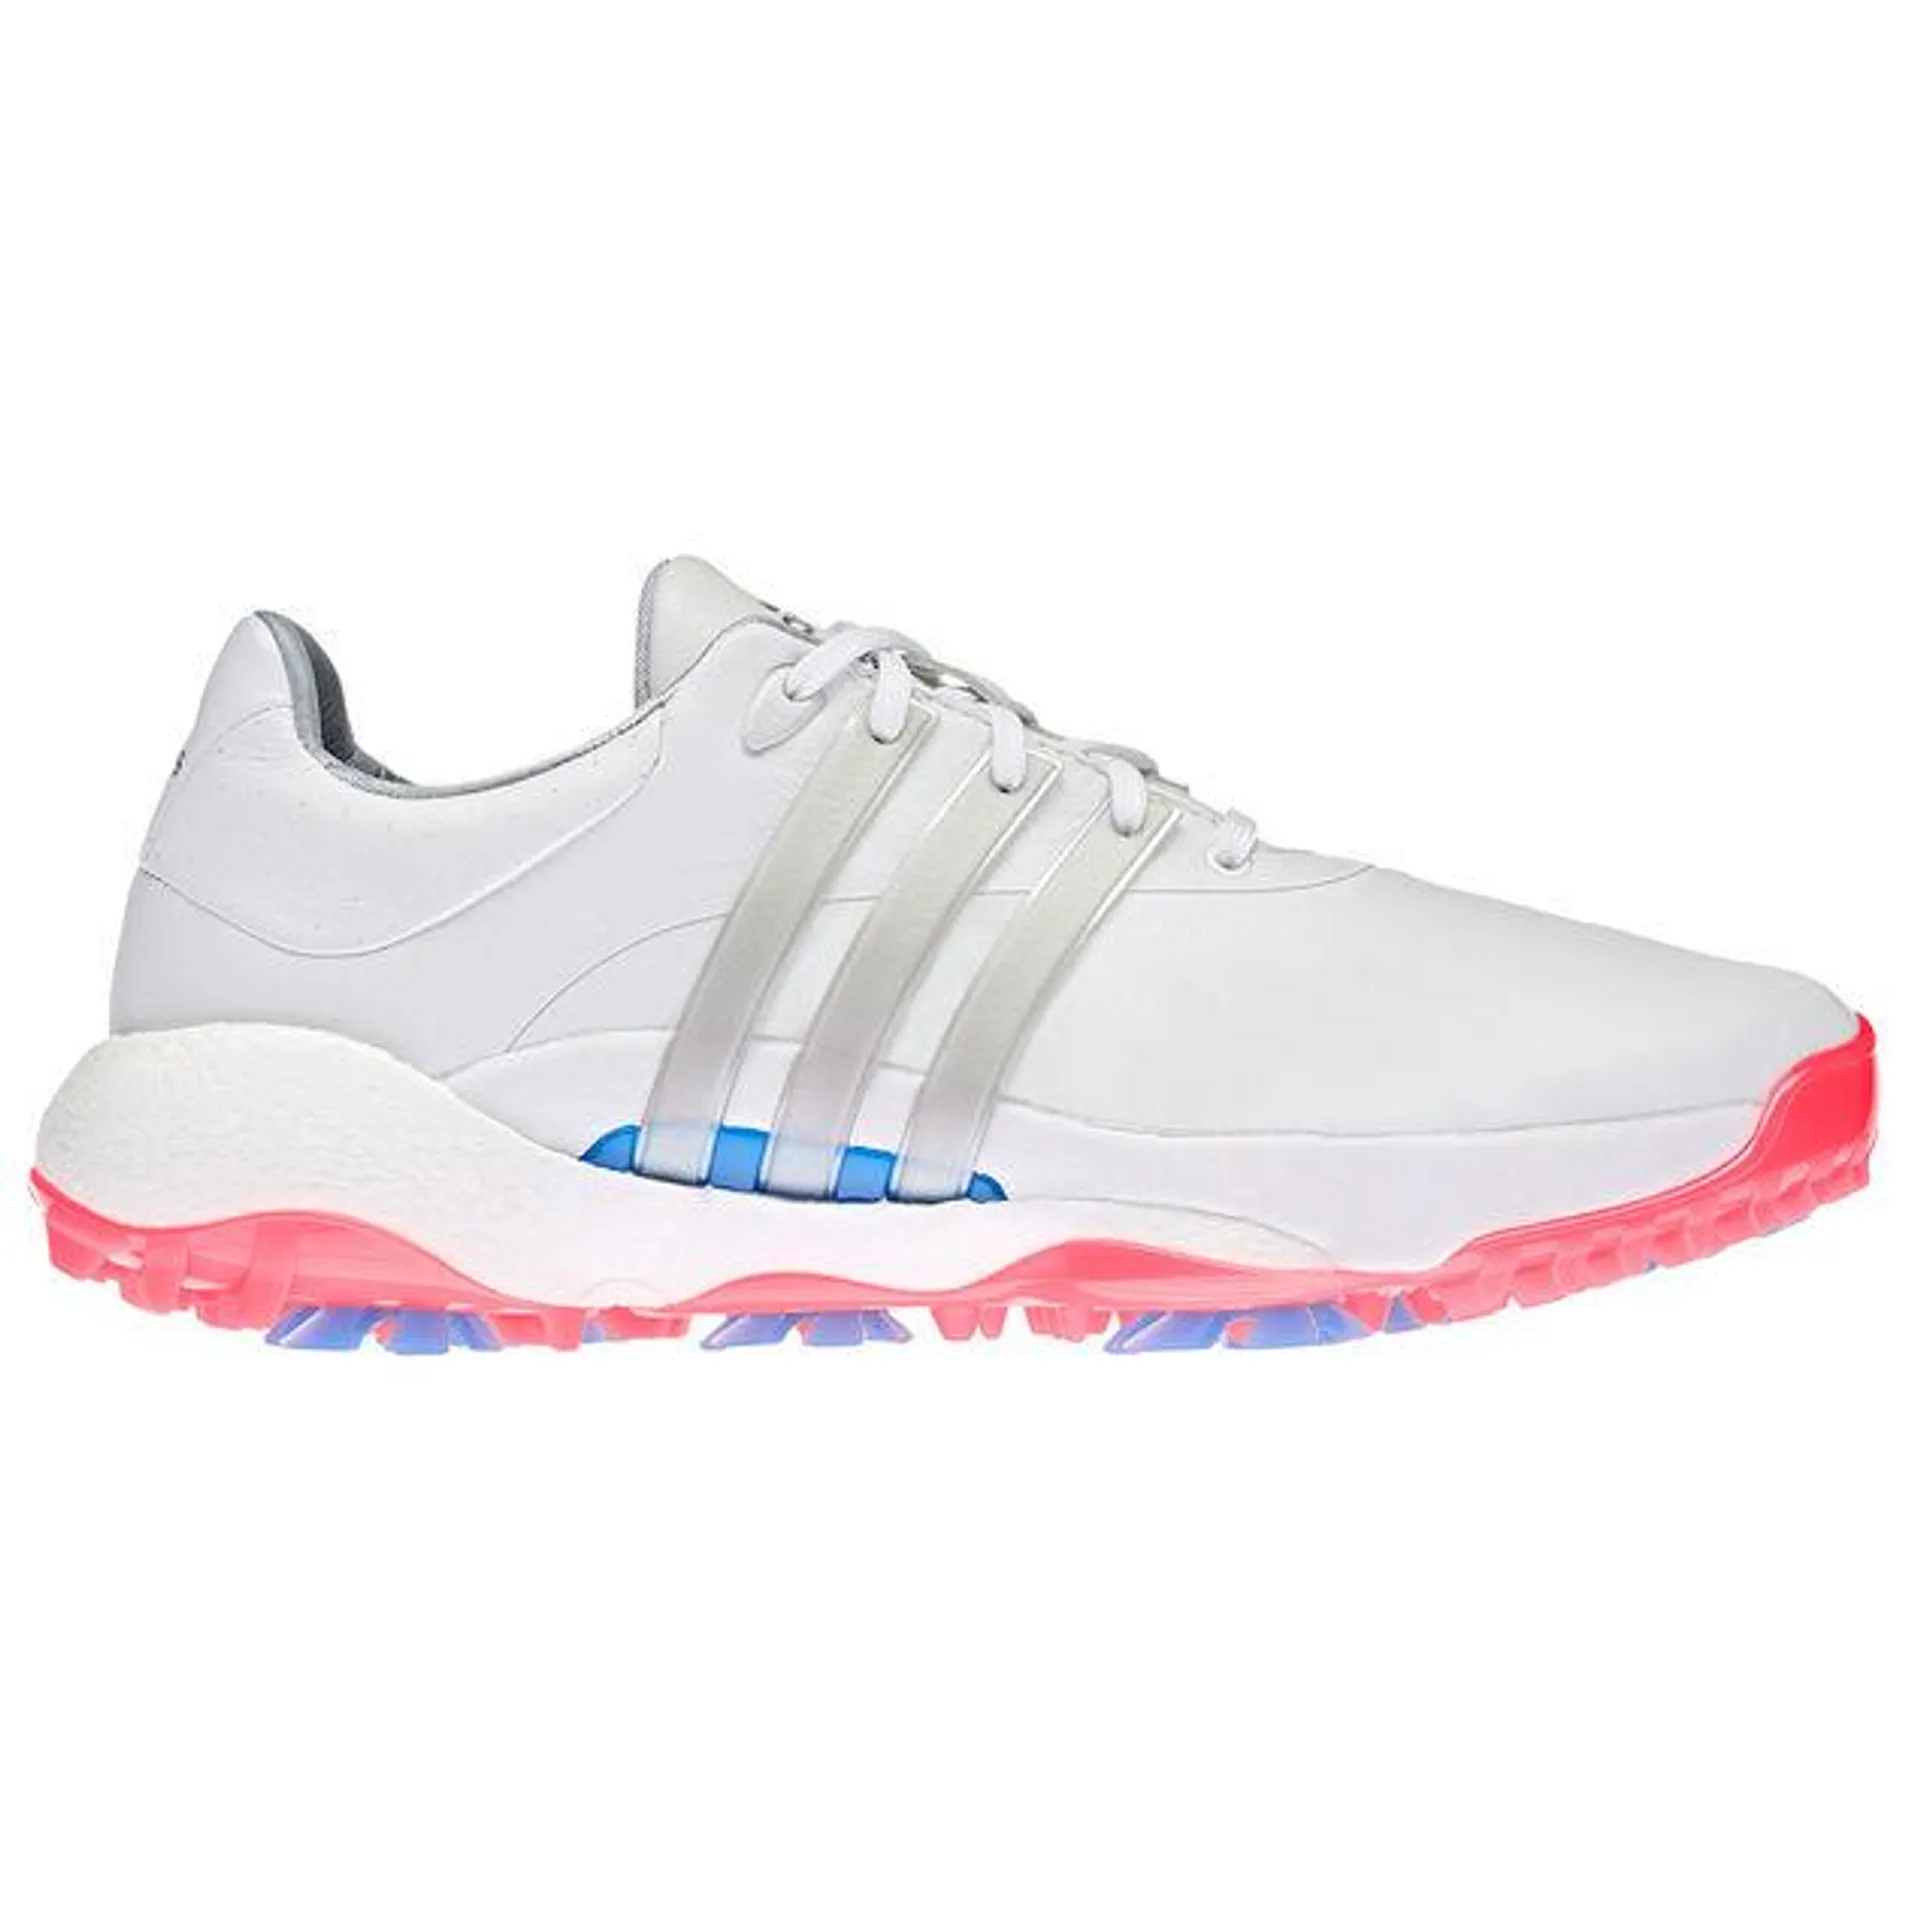 adidas Ladies Tour360 22 Waterproof Spiked Golf Shoes